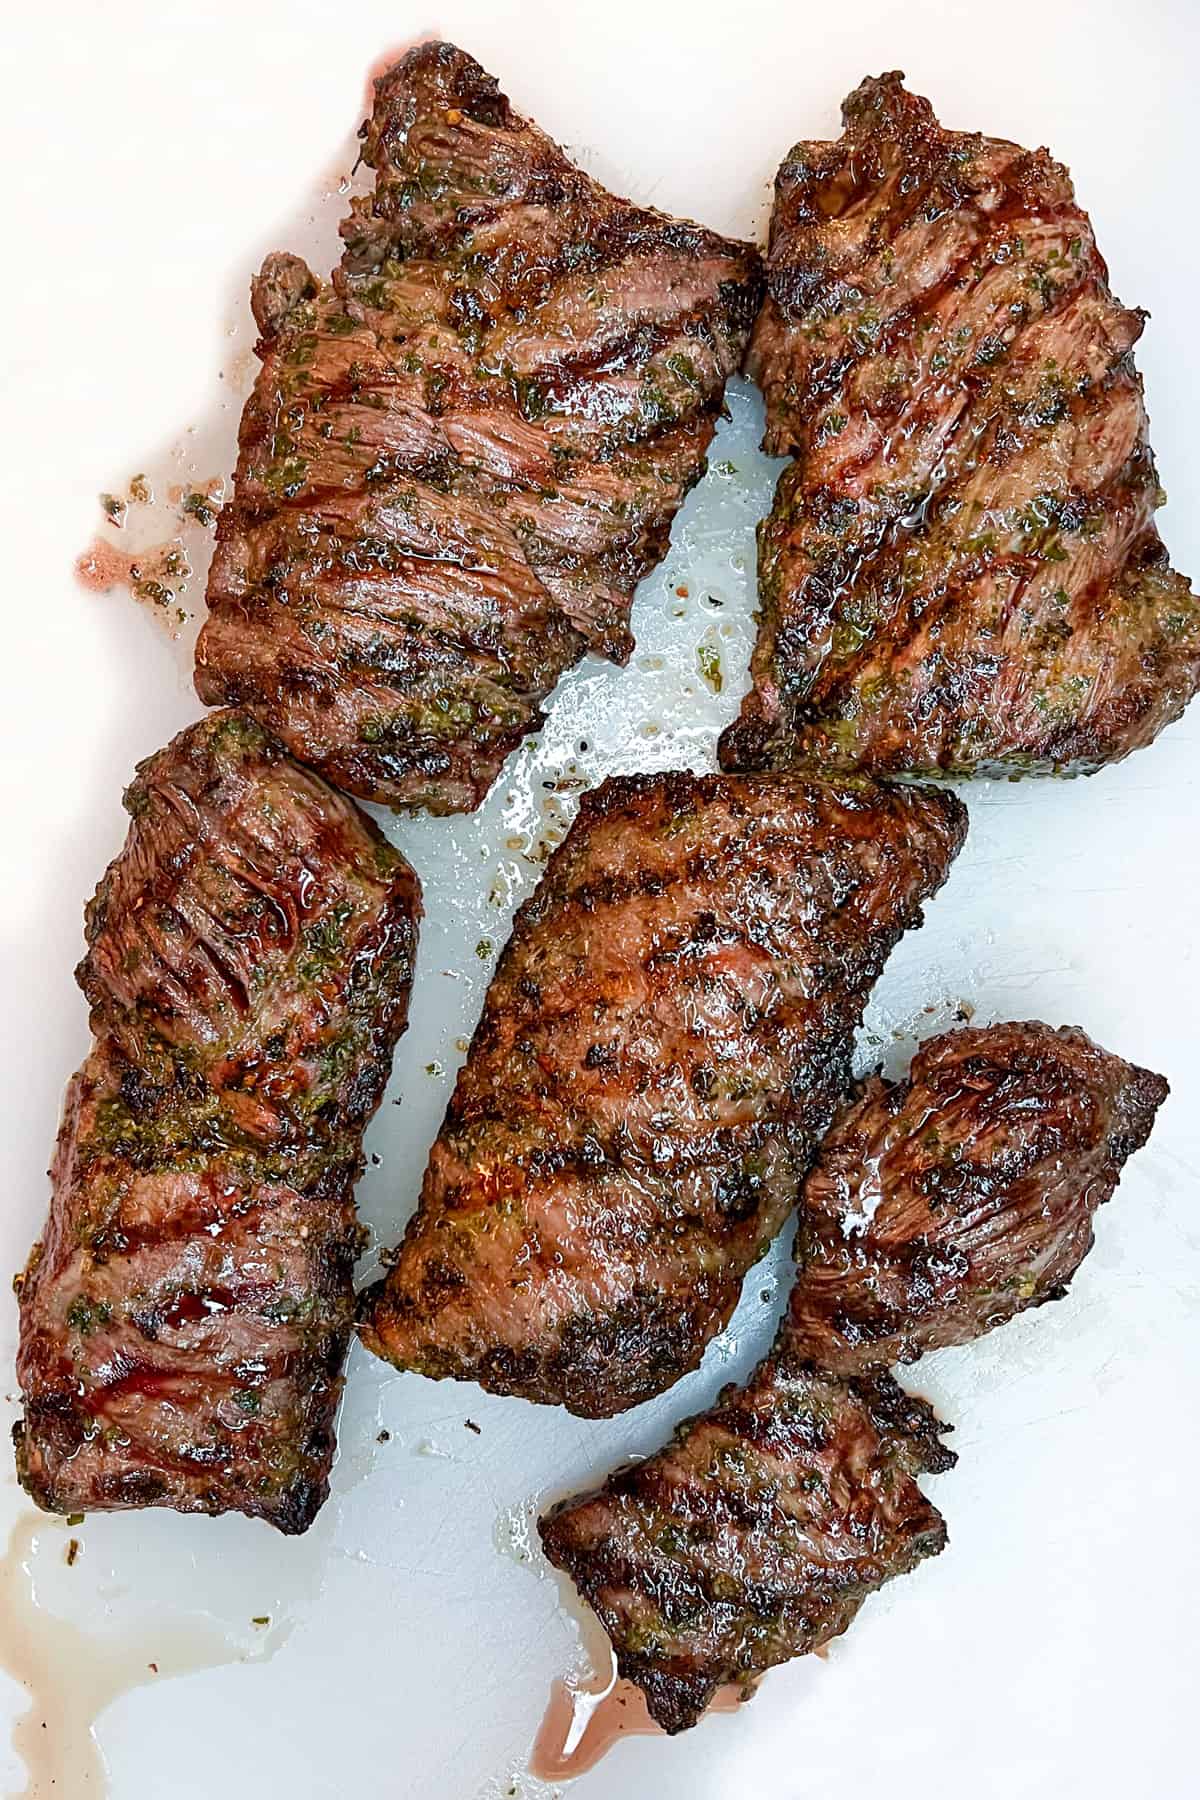 5 pieces of grilled skirt steak on a white cutting board seen from above